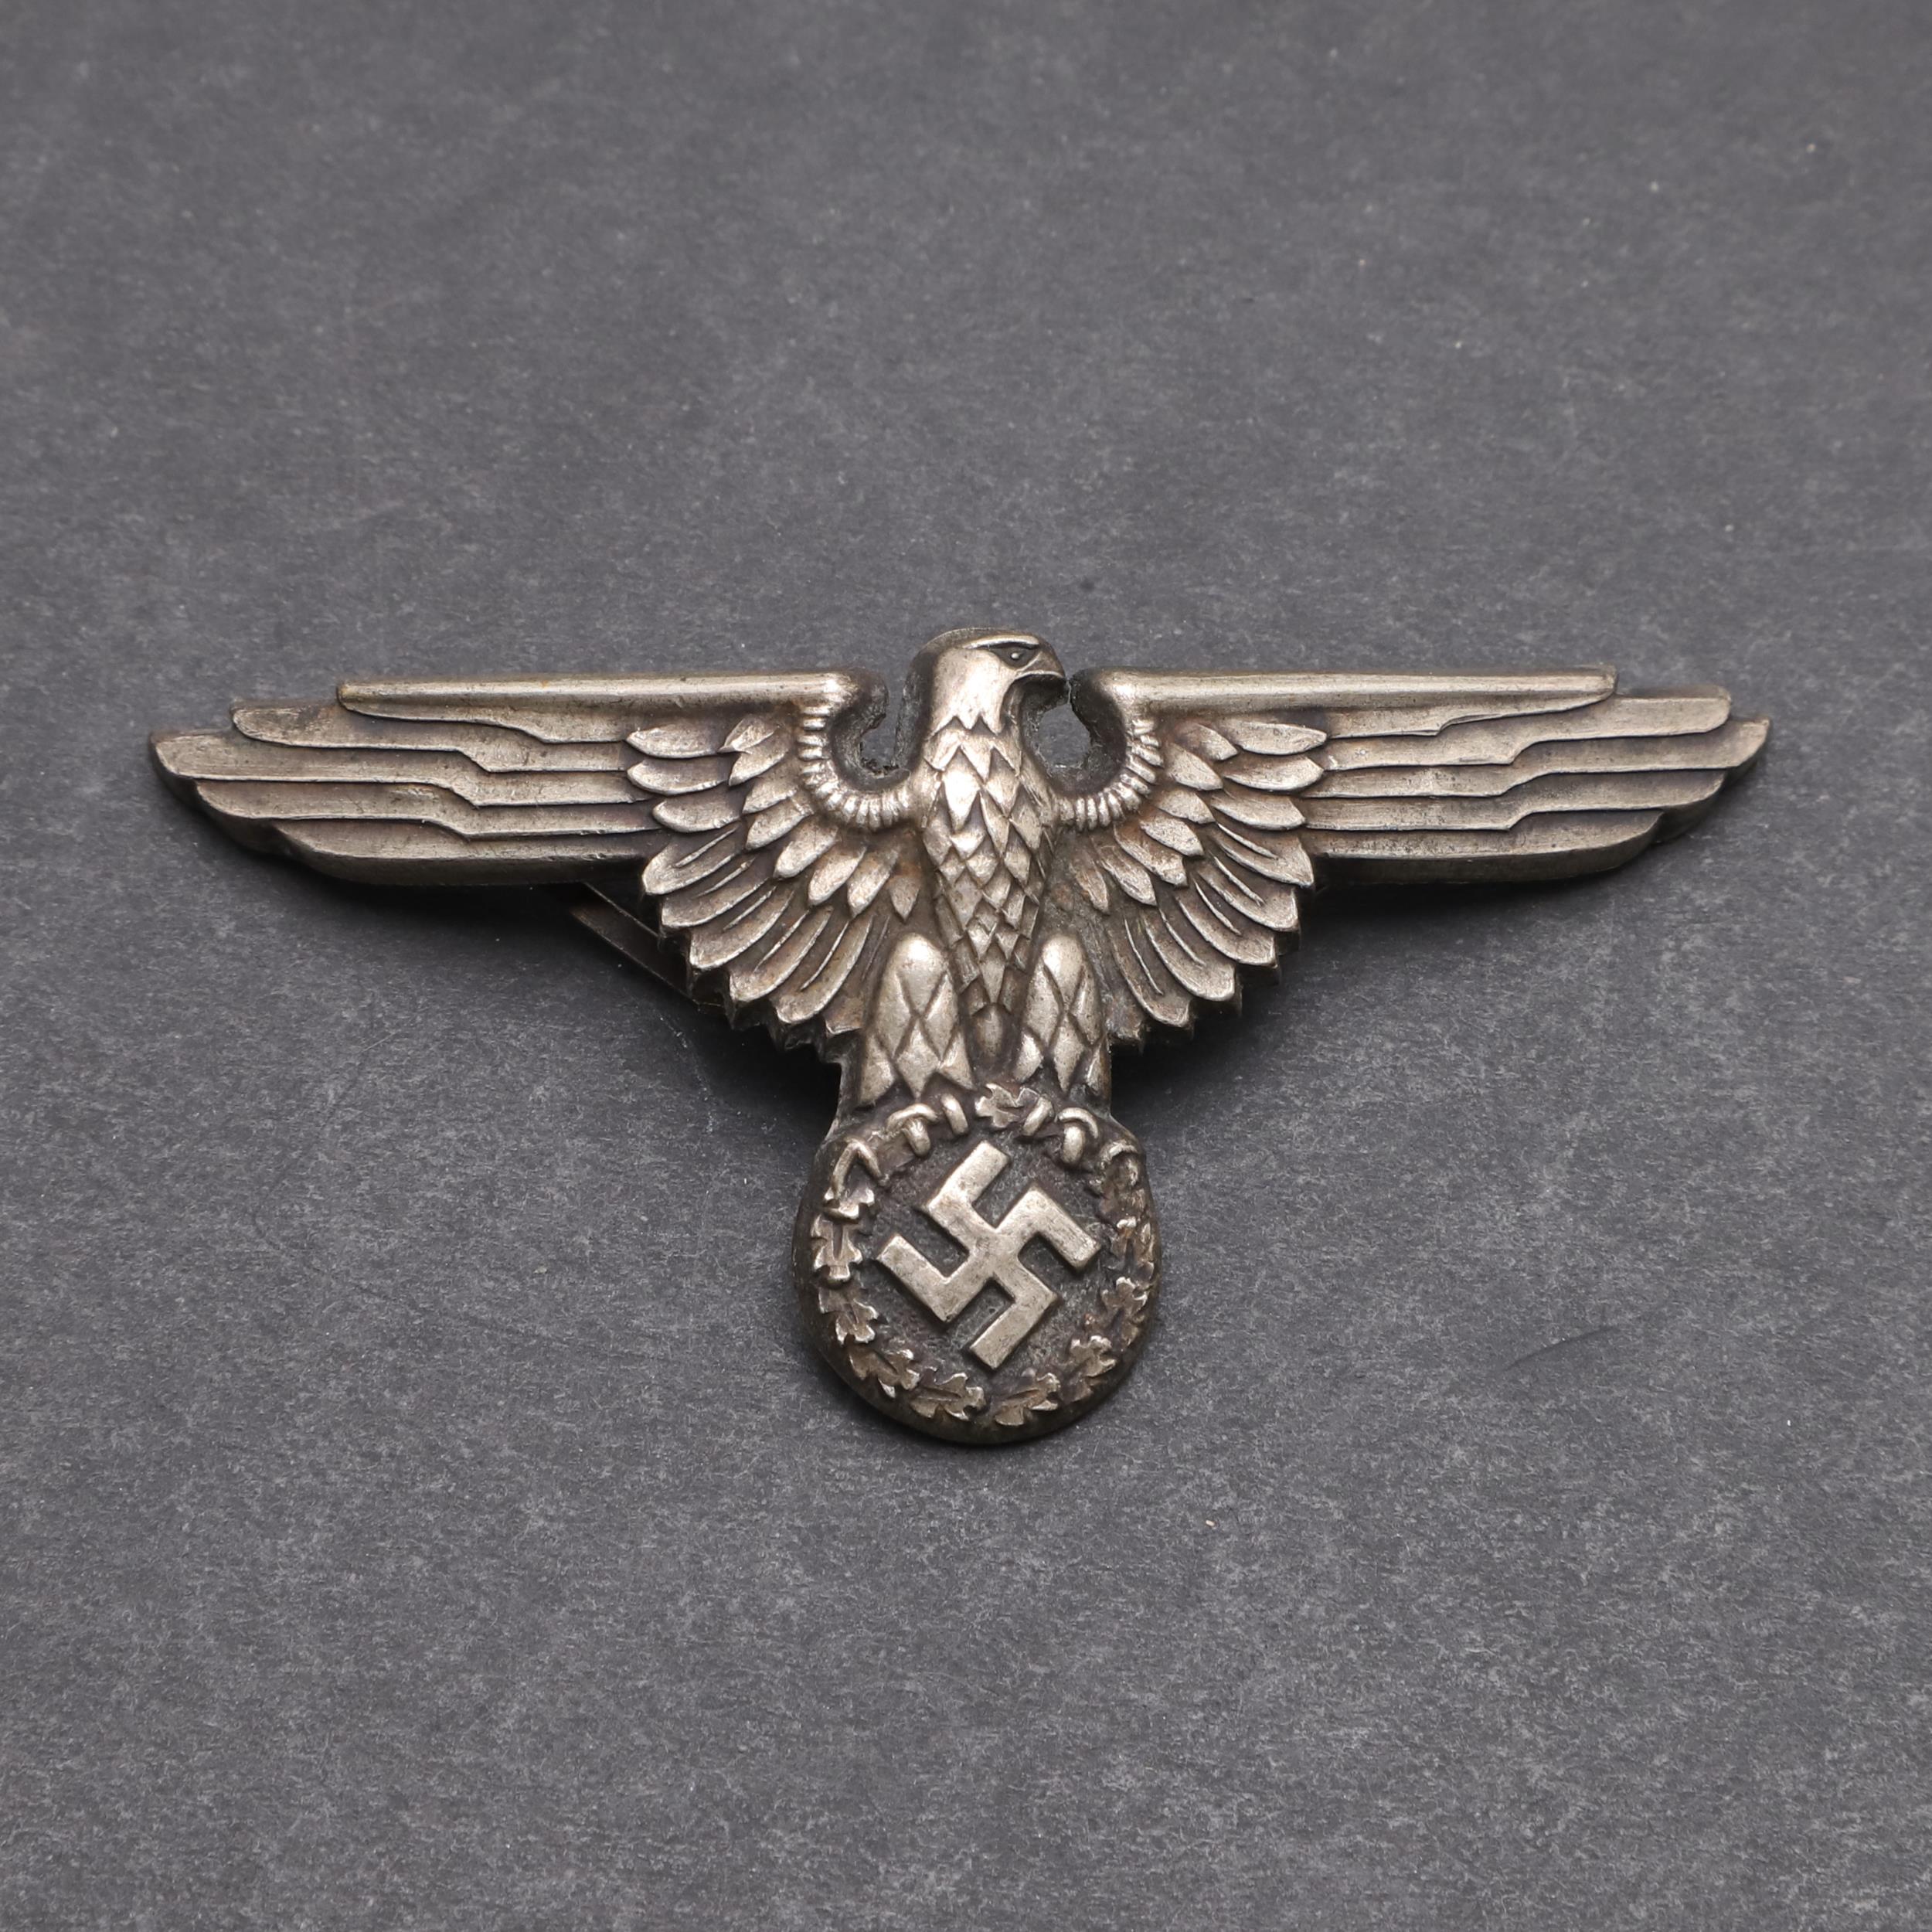 A SECOND WORLD WAR GERMAN SS OFFICER'S PEAKED CAP EAGLE. - Image 2 of 4